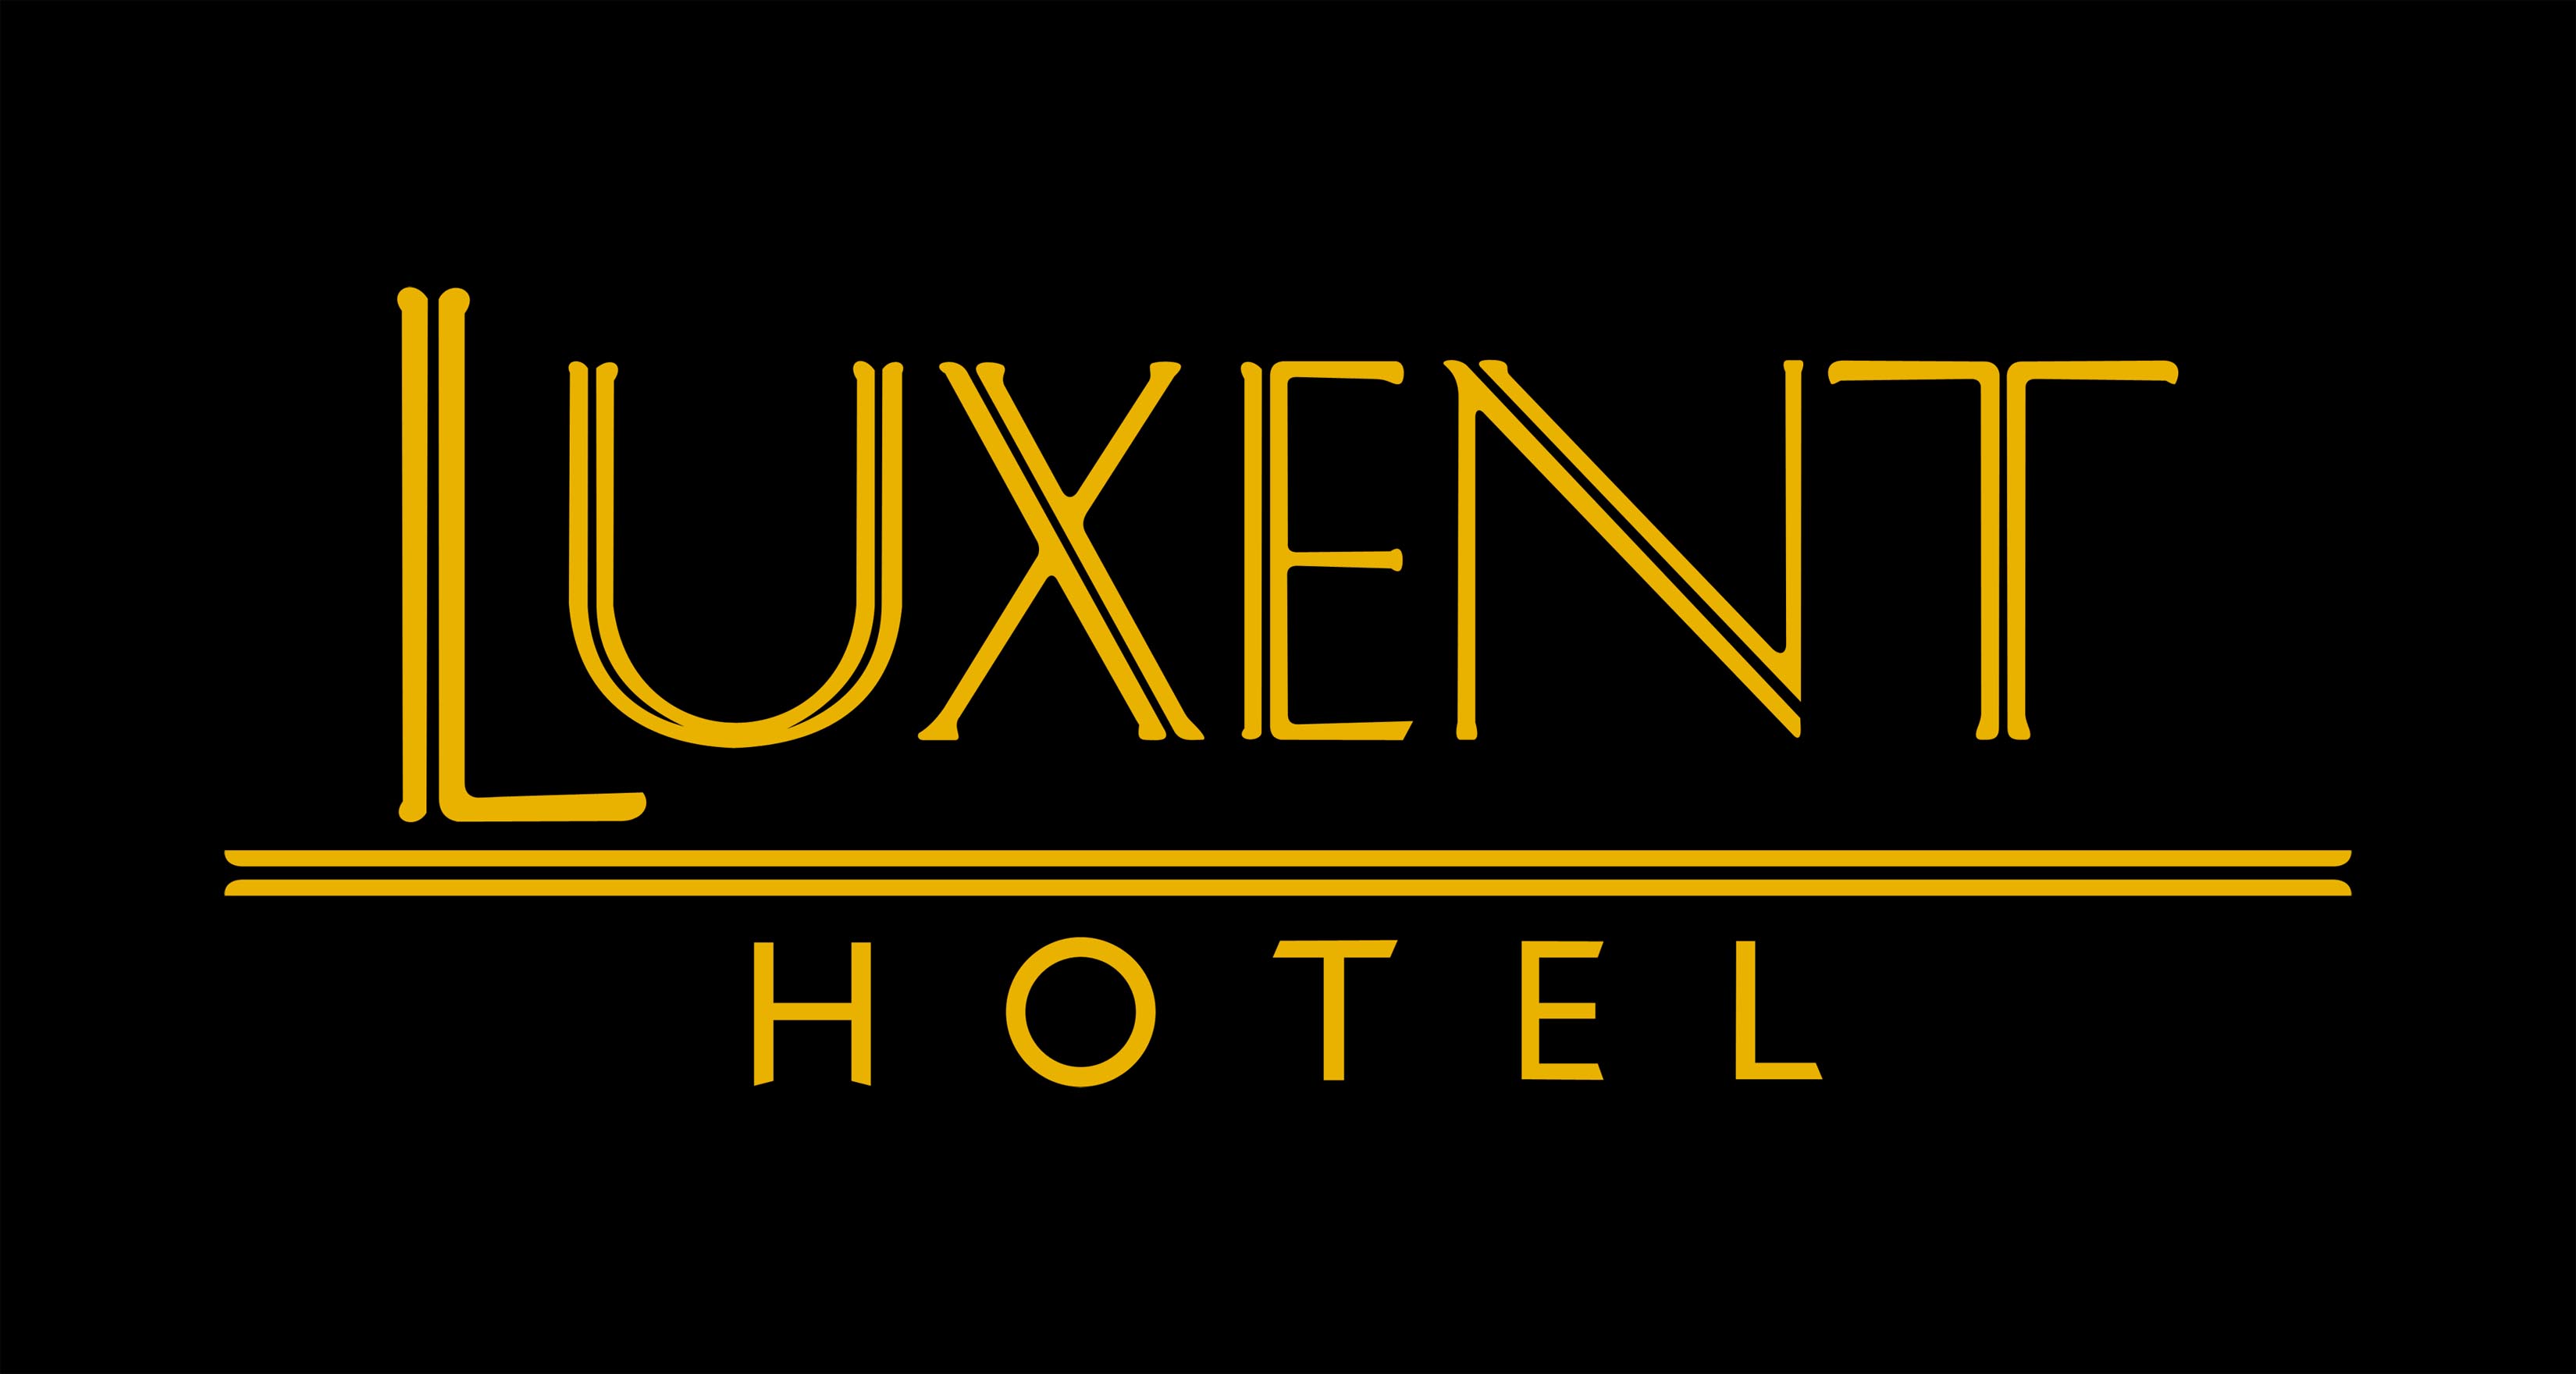 Luxent Hotel